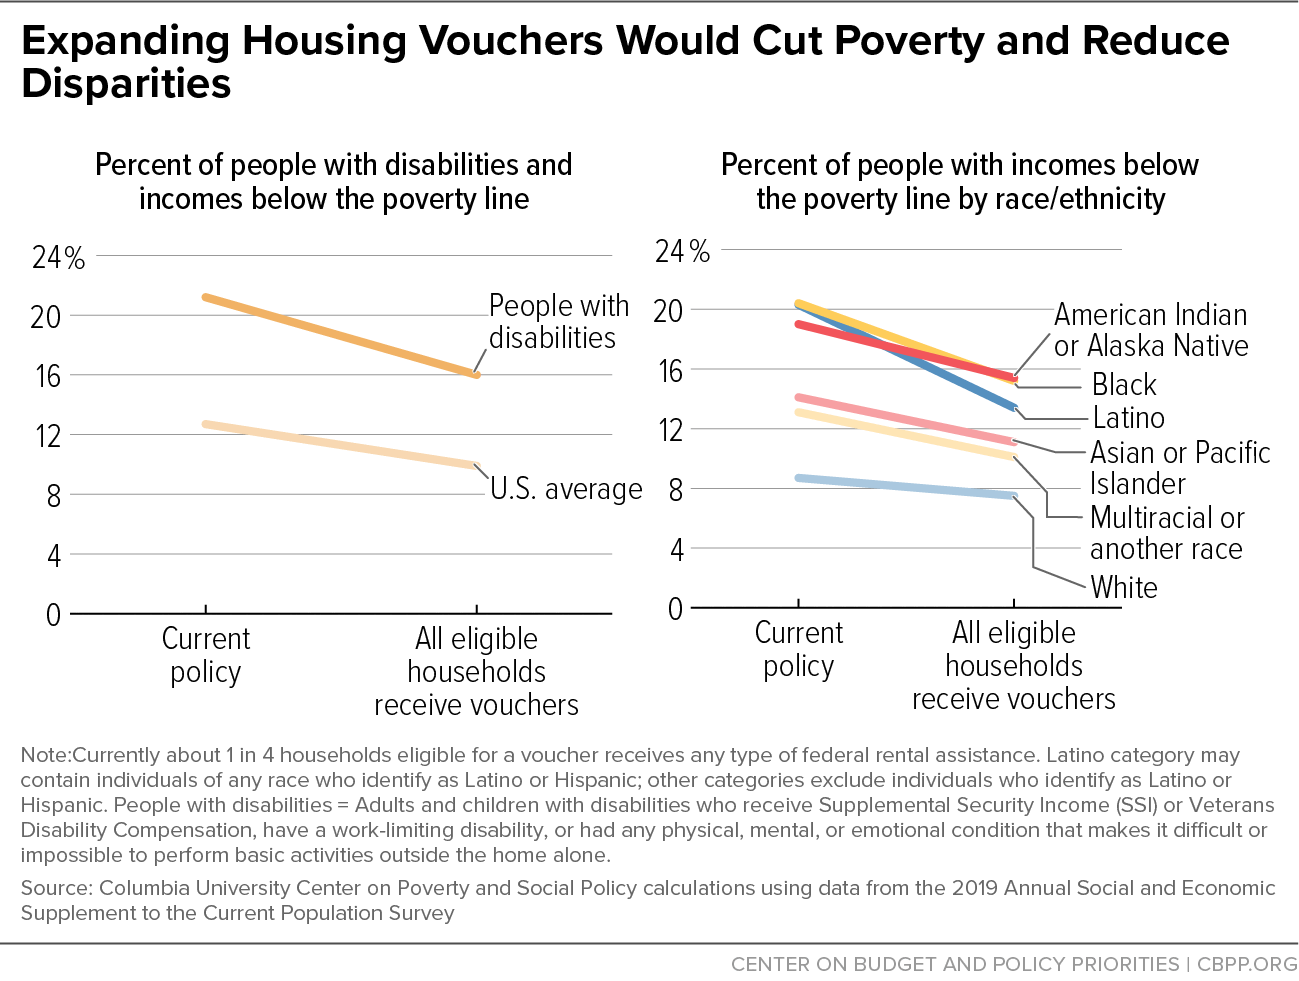 Expanding Housing Vouchers Would Cut Poverty and Reduce Disparities